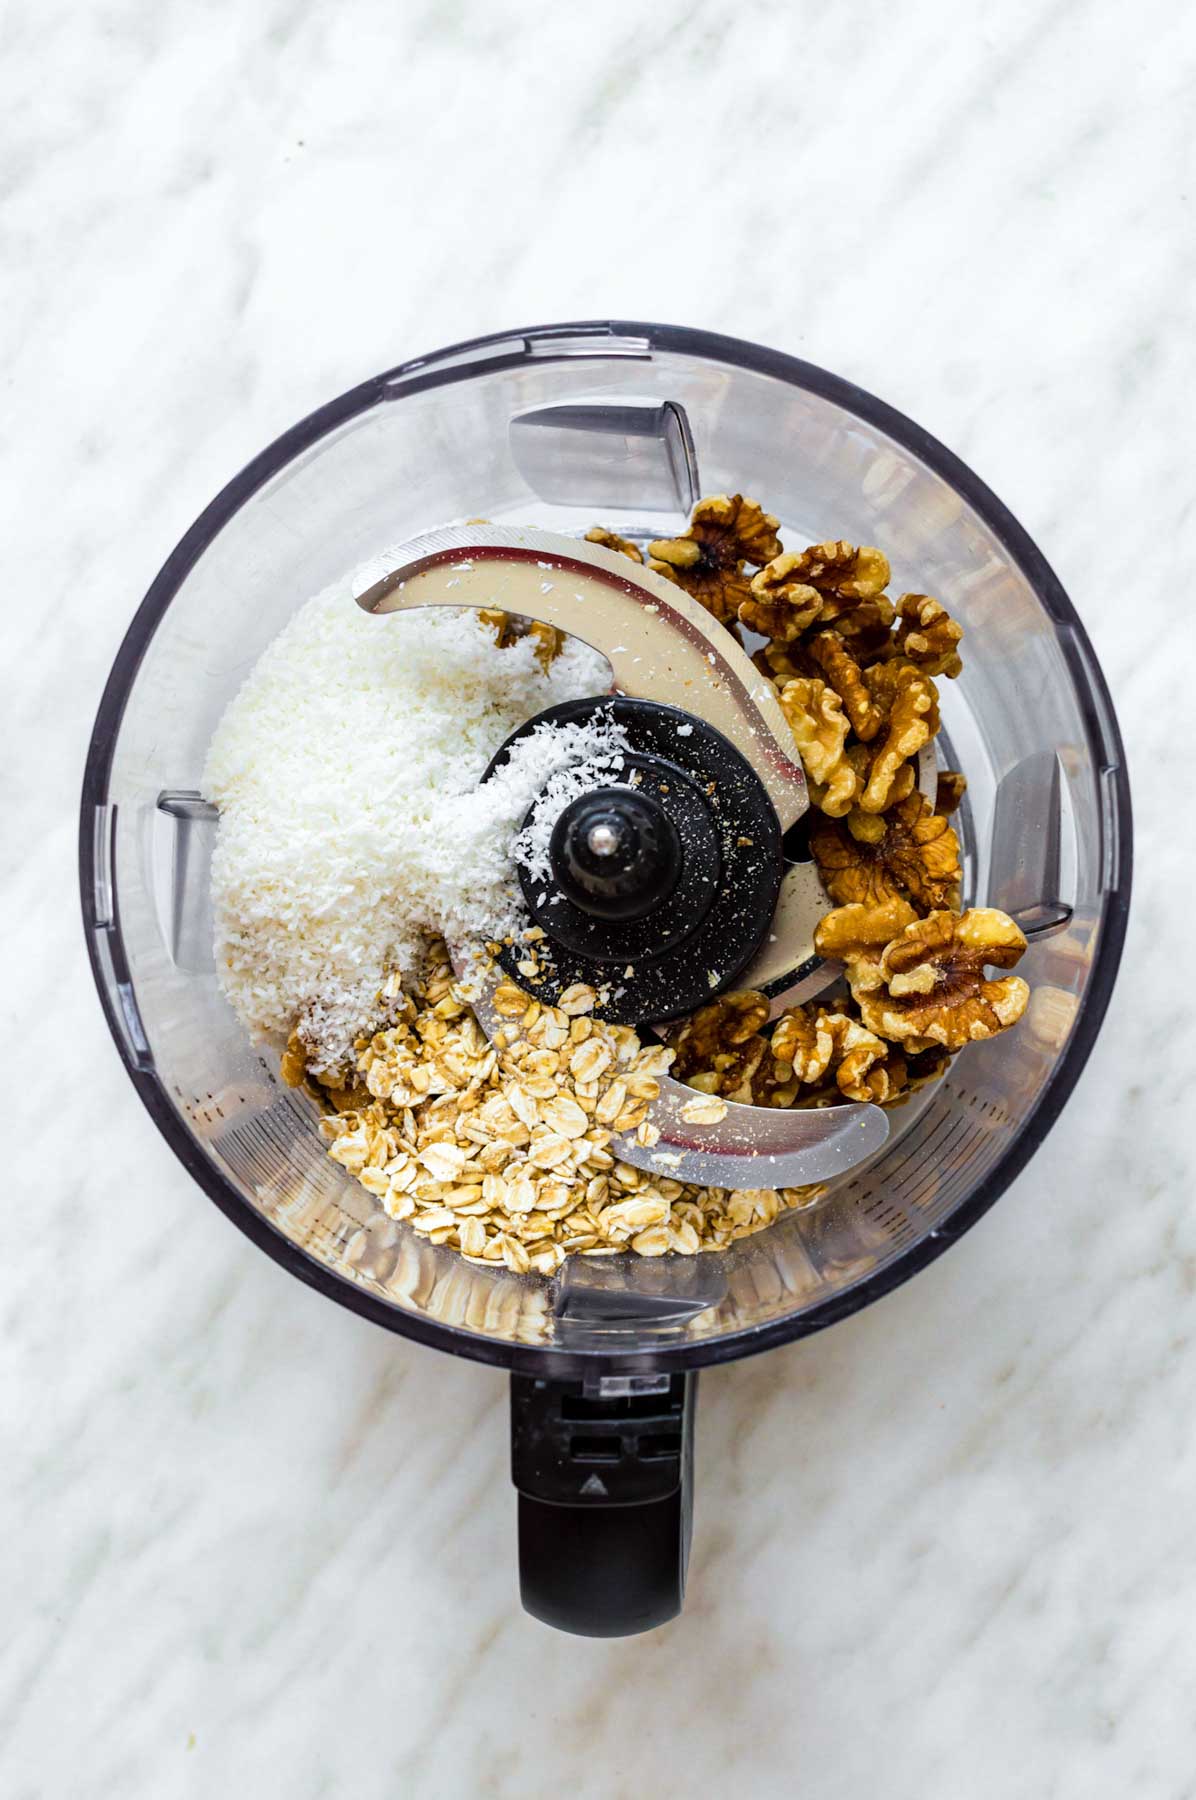 Walnuts, oats, and shredded coconut added to a food processor.